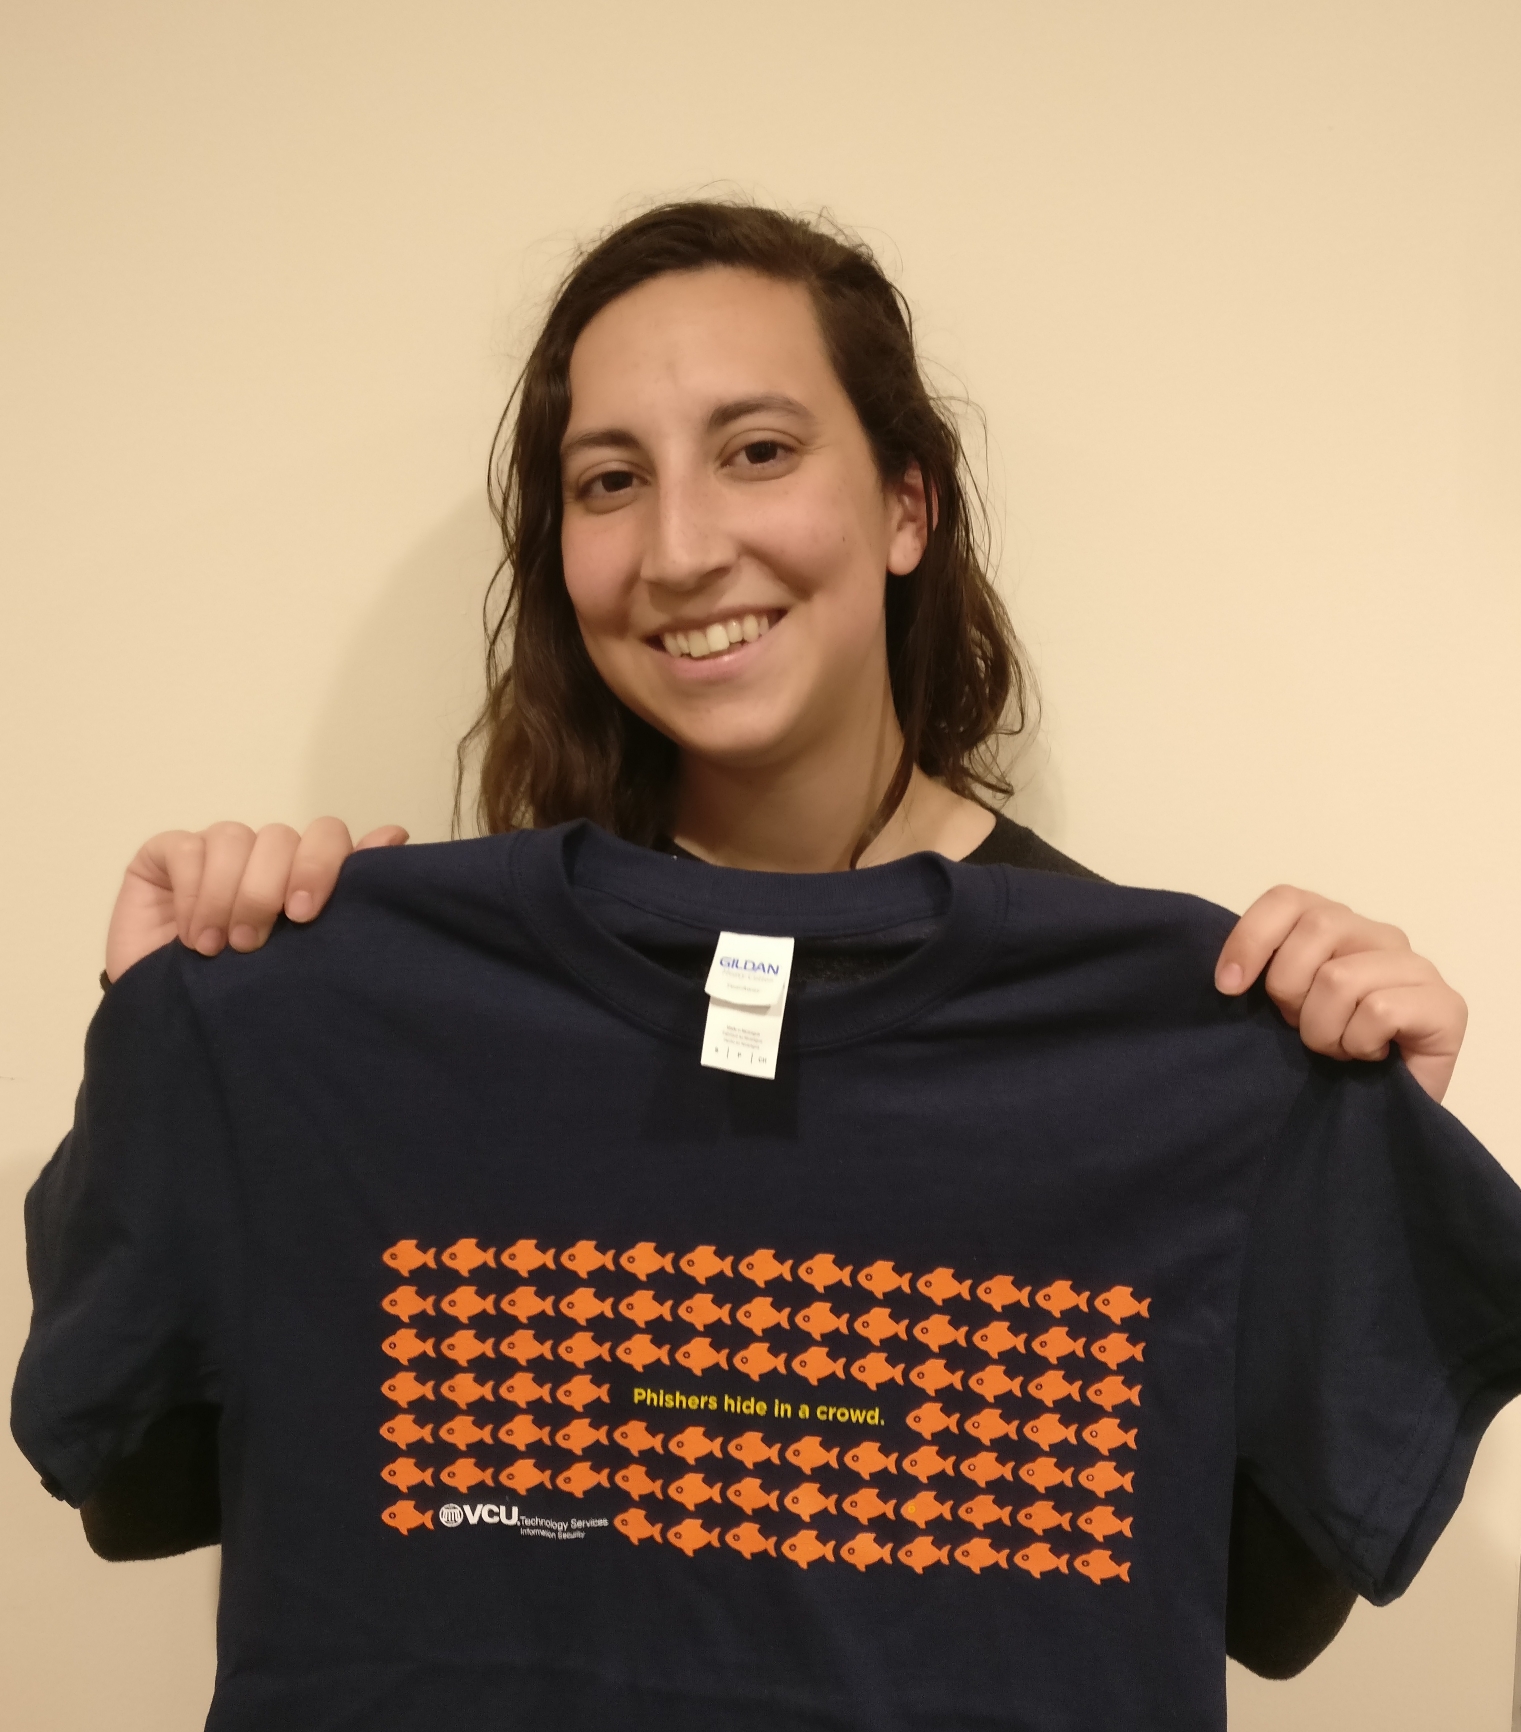 Photo of  Emily Kundrot holding a phishers hide in a crowd tee.